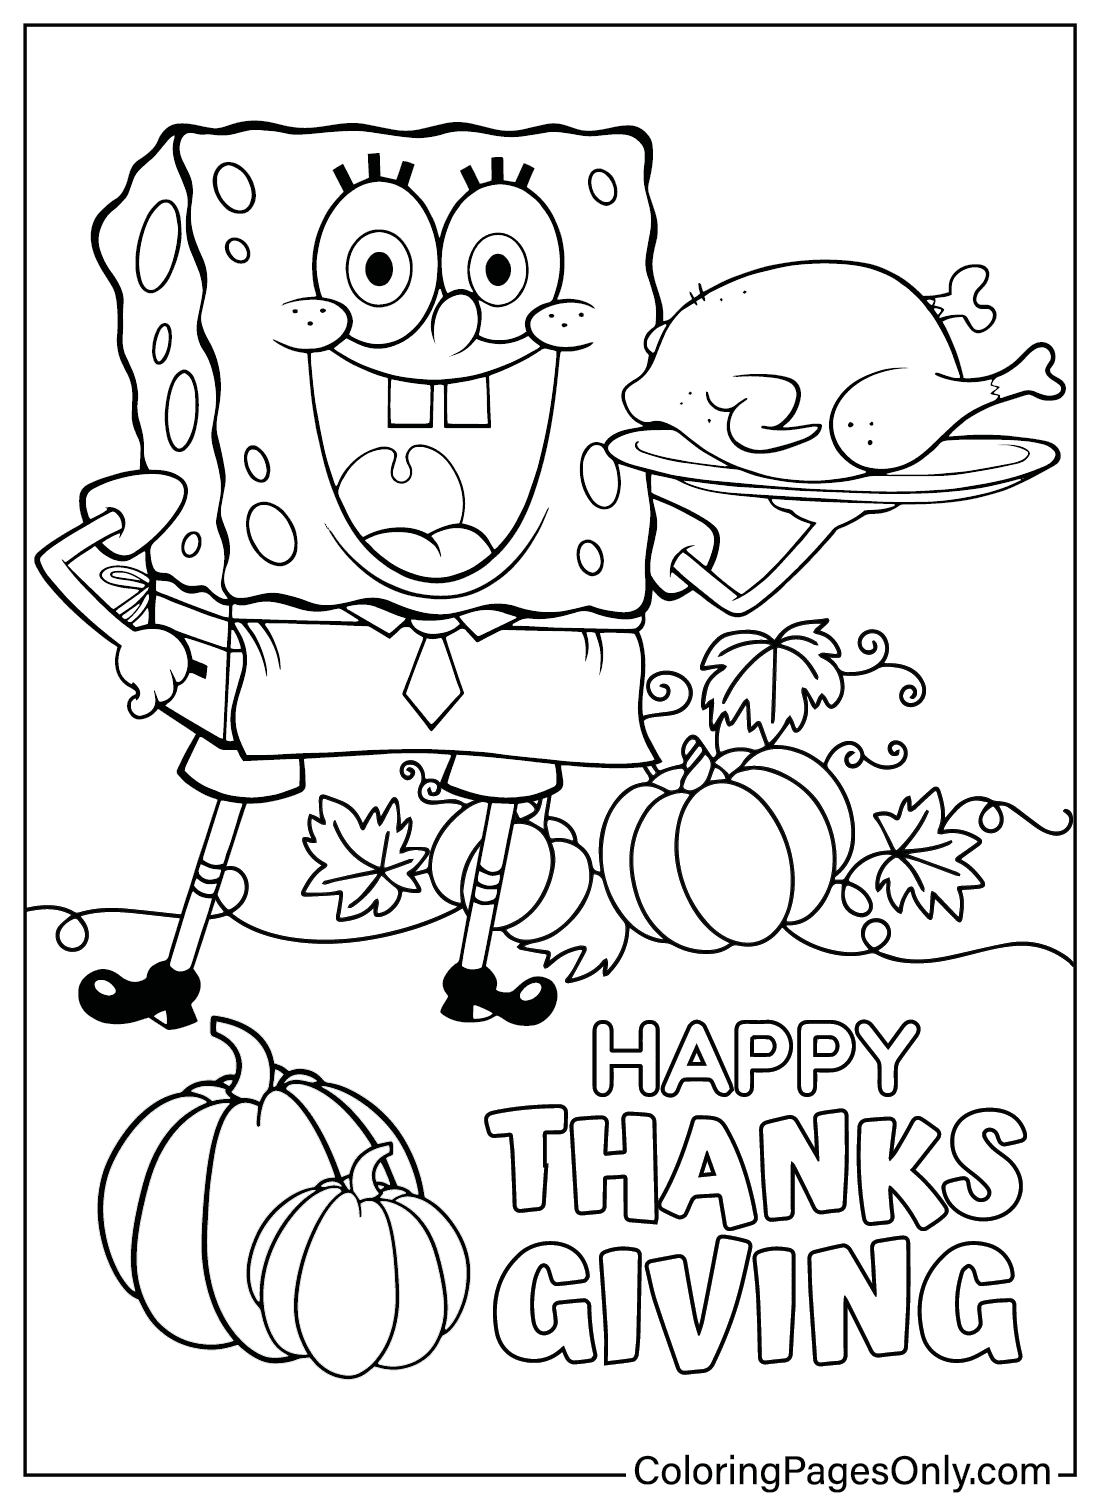 Thanksgiving Spongebob Coloring Page from Thanksgiving Cartoon